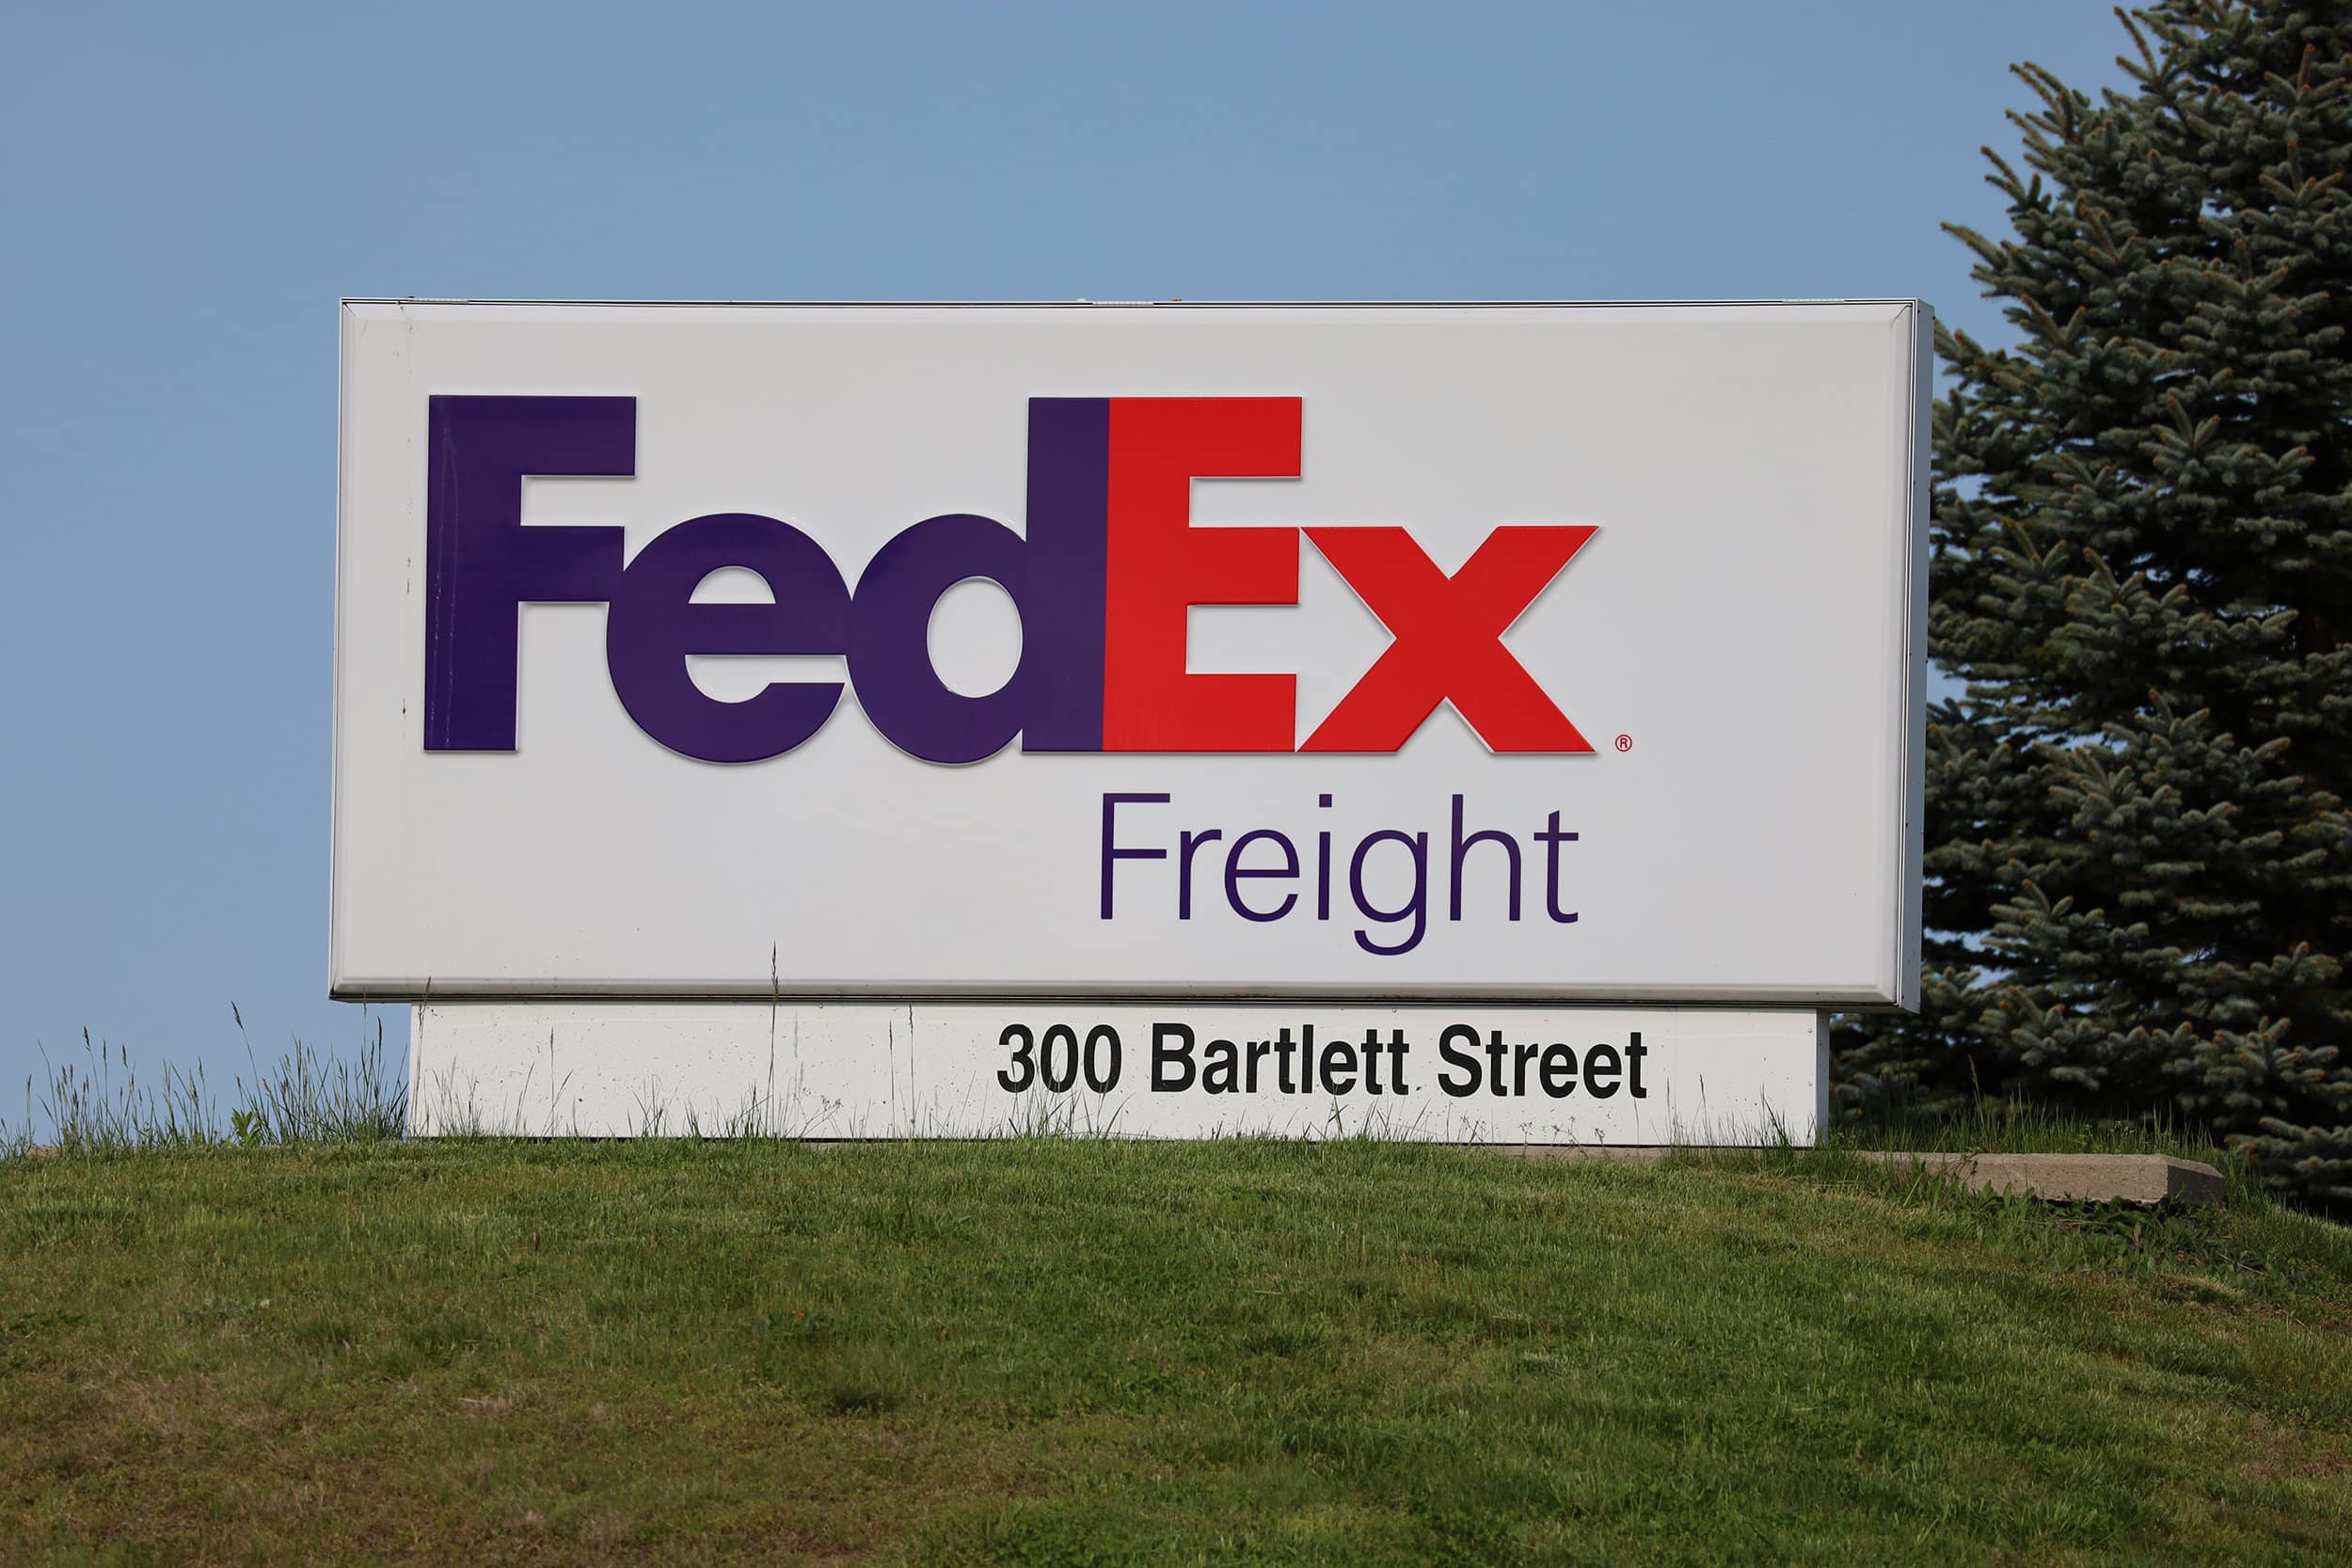 FedEx property expansion approved by Northborough ZBA